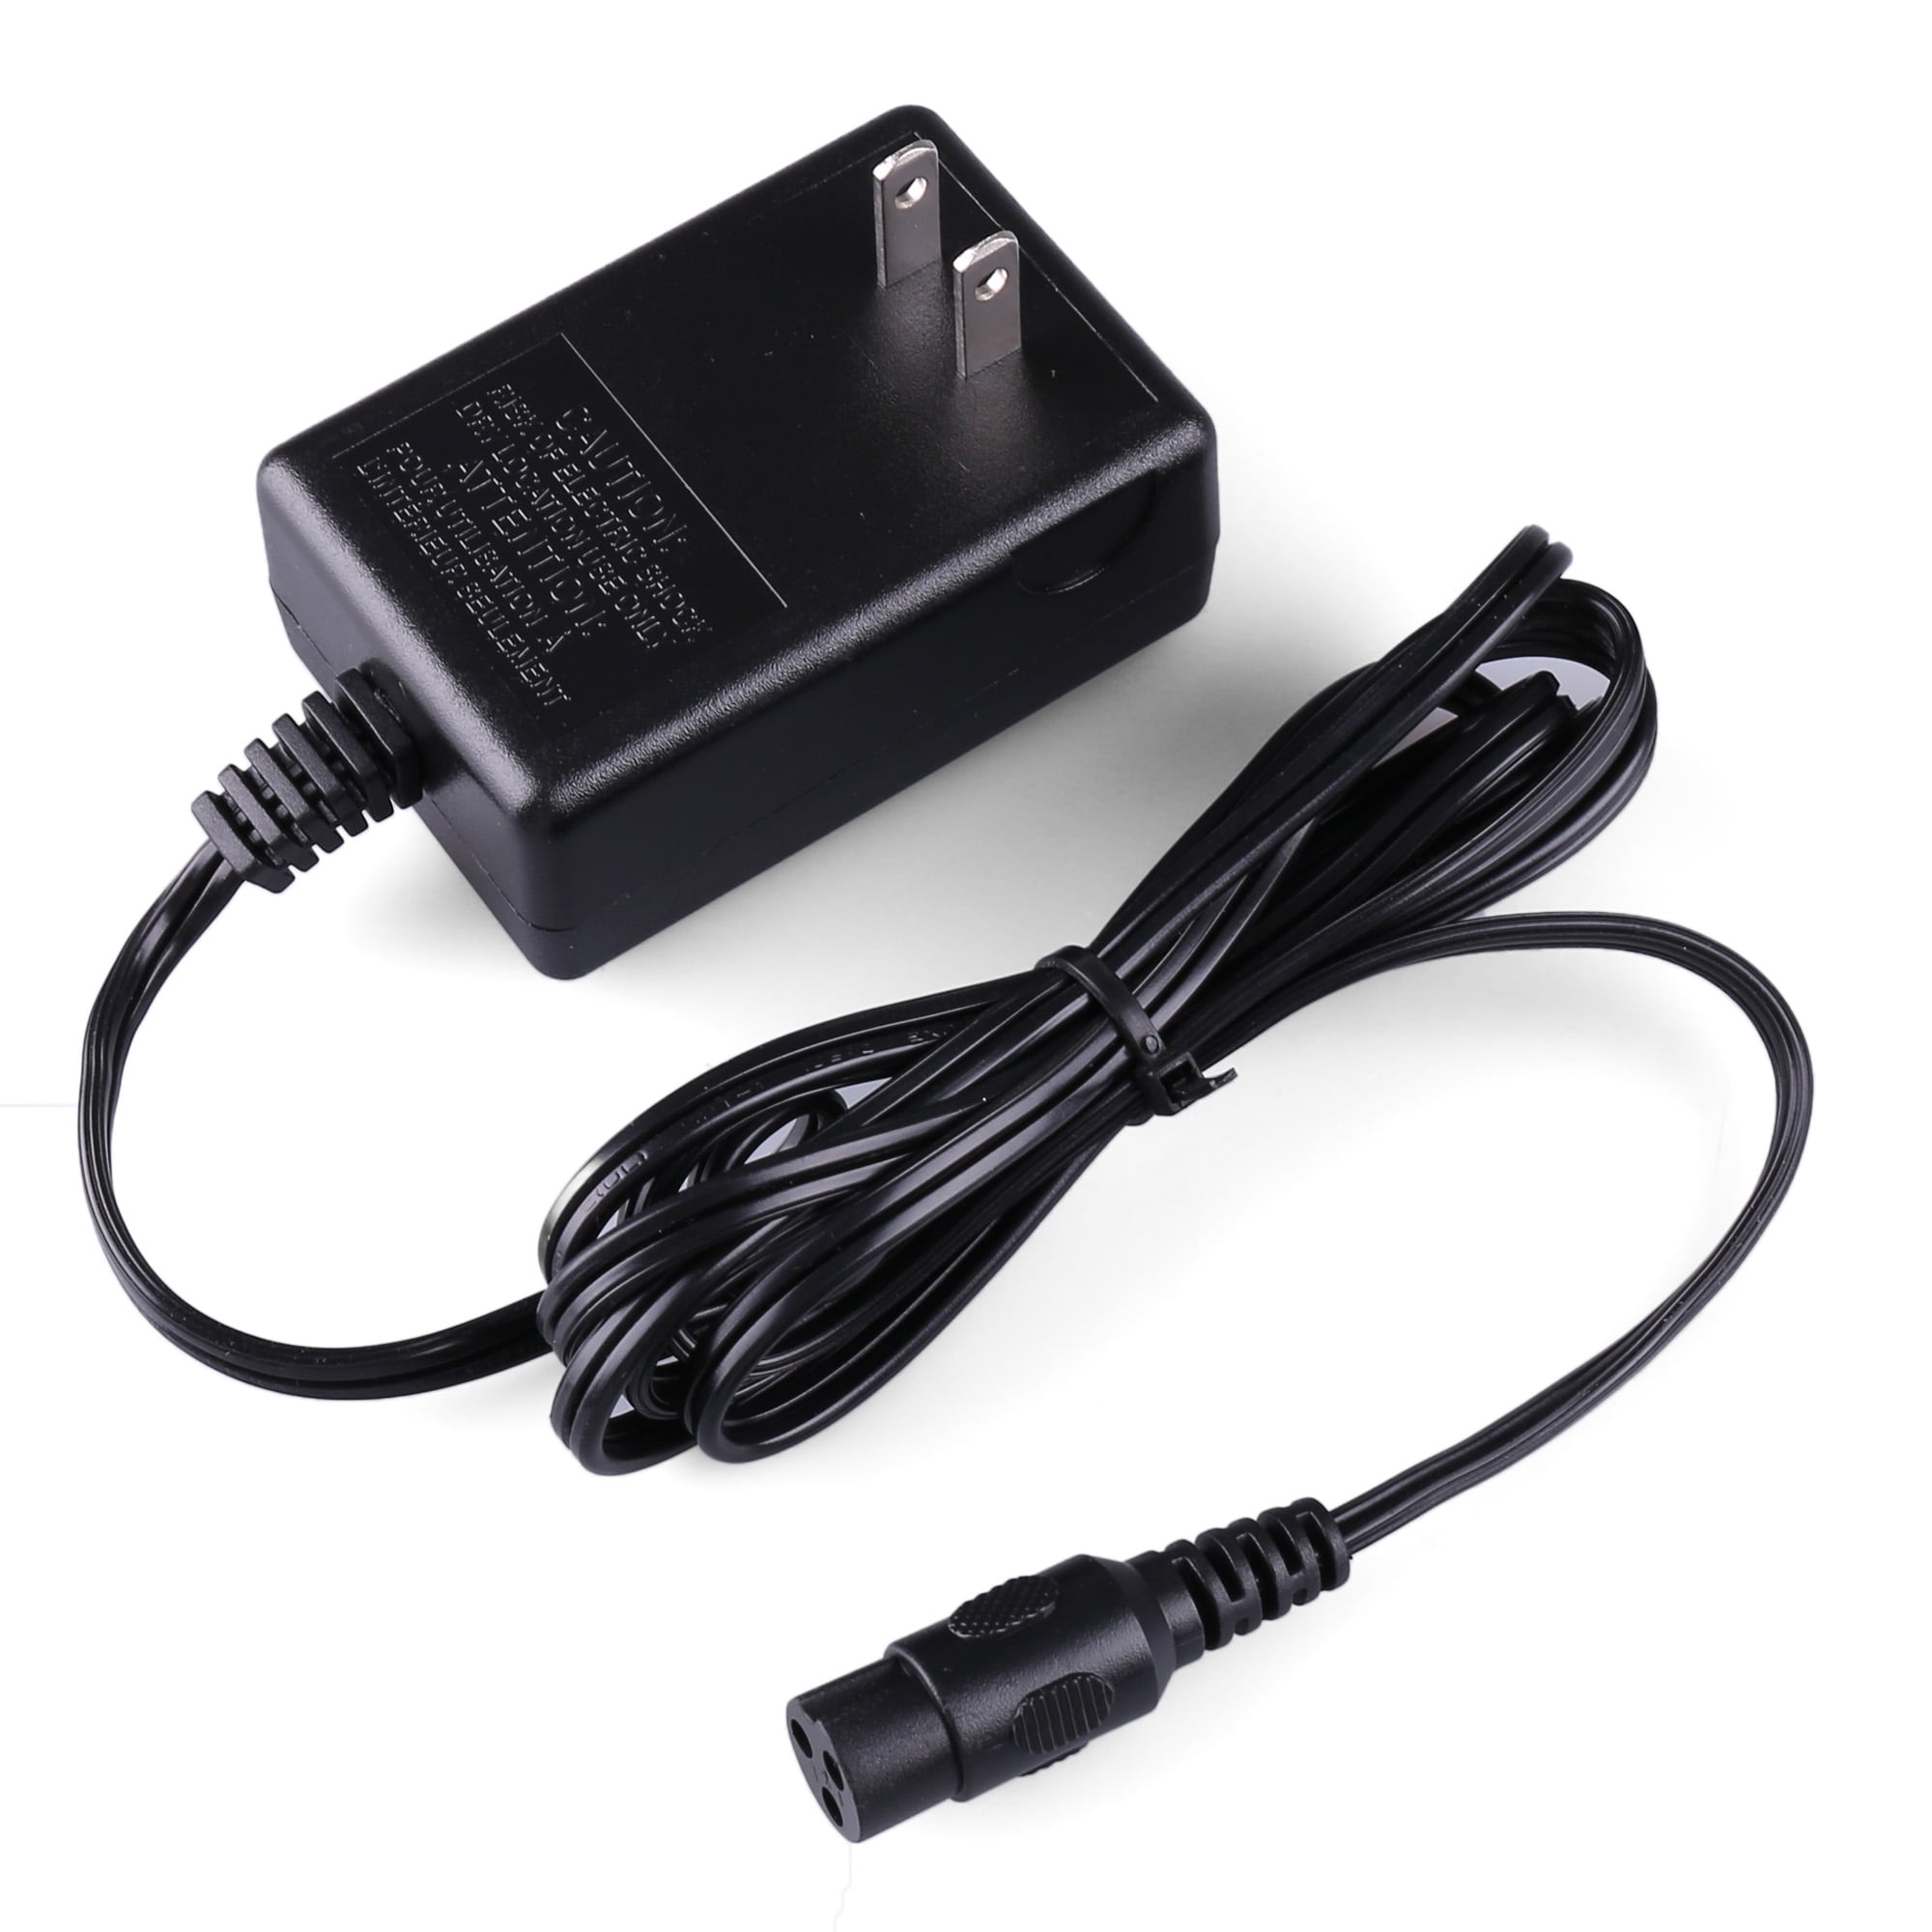 Urabiu 36W Electric Scooter Battery Charger for Razor E175 E125 E150 E500 Pocket Mod Sports Mod and Dirt Quad 3-Prong Inline Scooter Power Supply Cord 